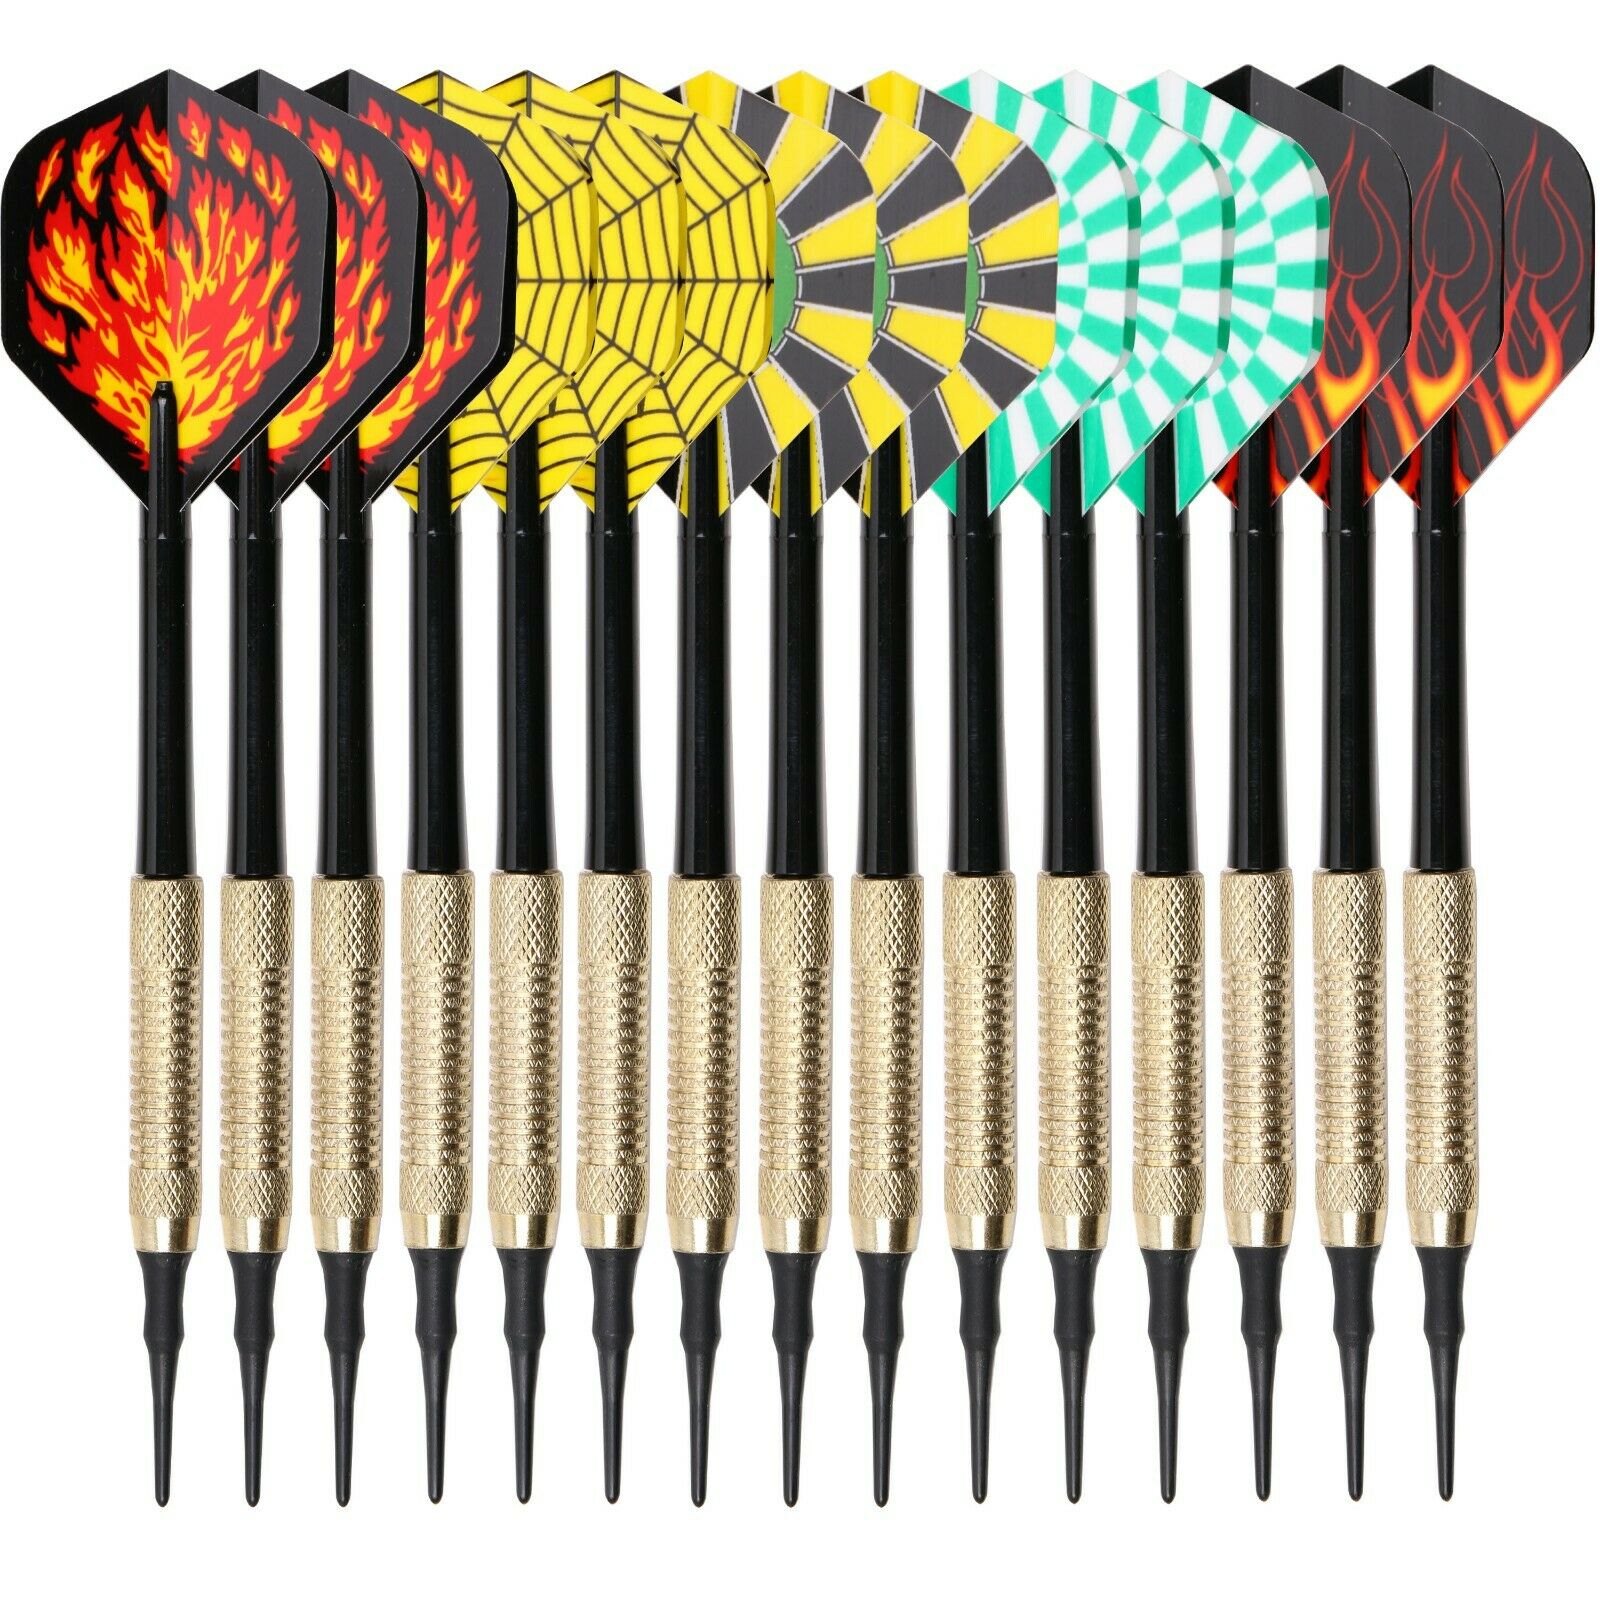 15 Pack Soft Tips Darts For Electronic Dartboard Plastic Point Tip Dart Replace